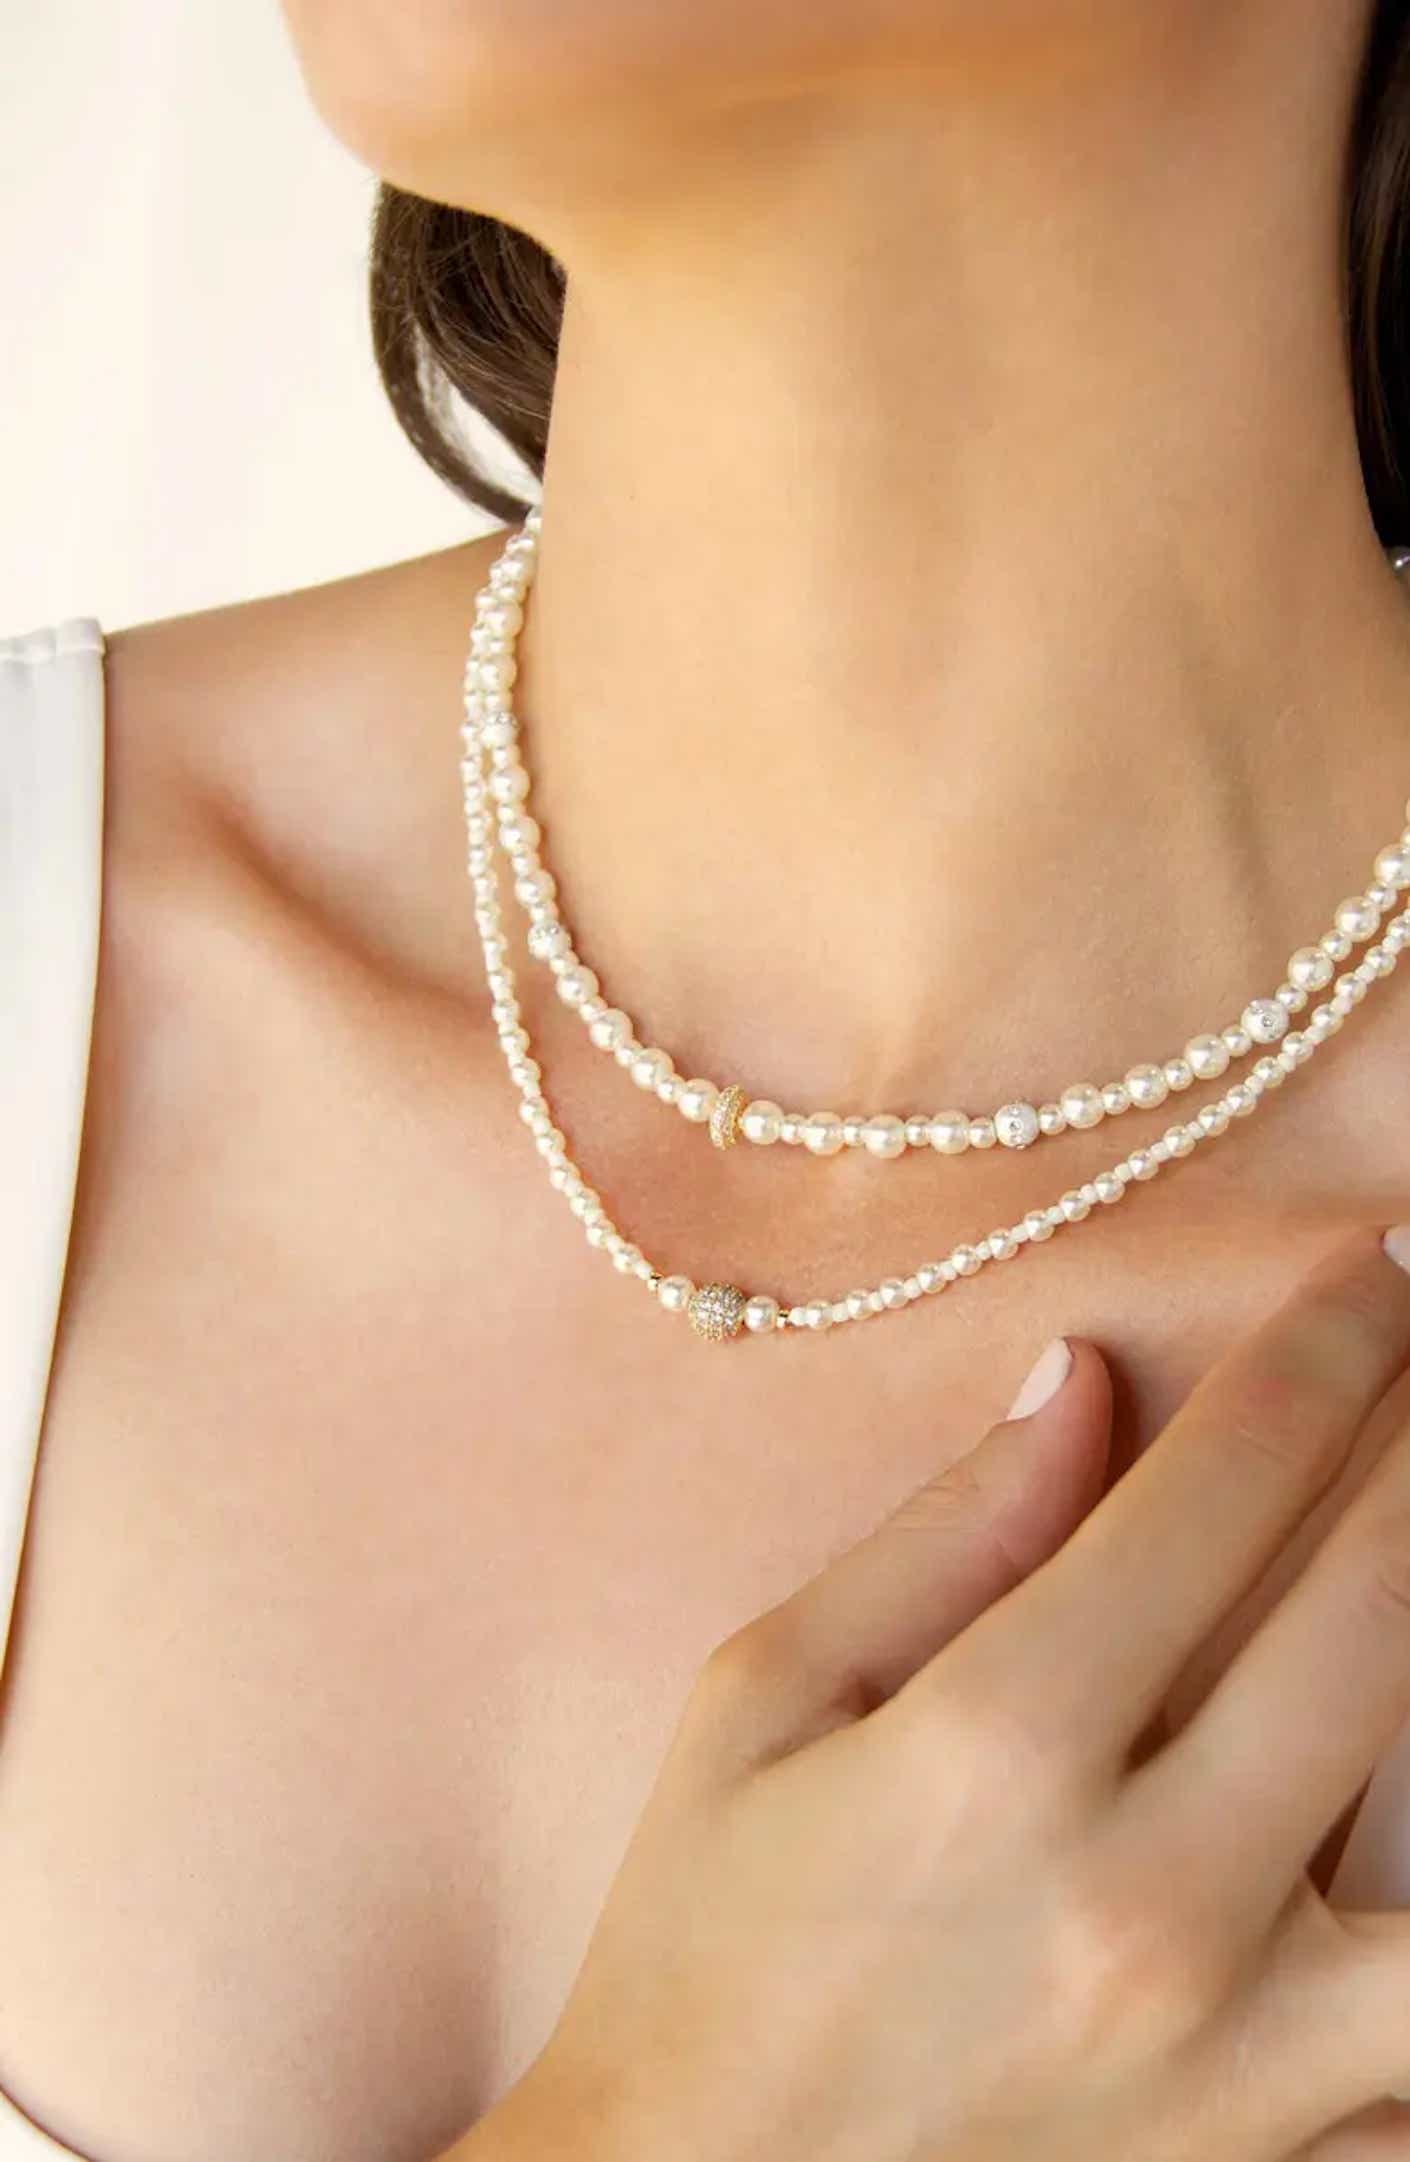 A woman wears a pearl necklace.